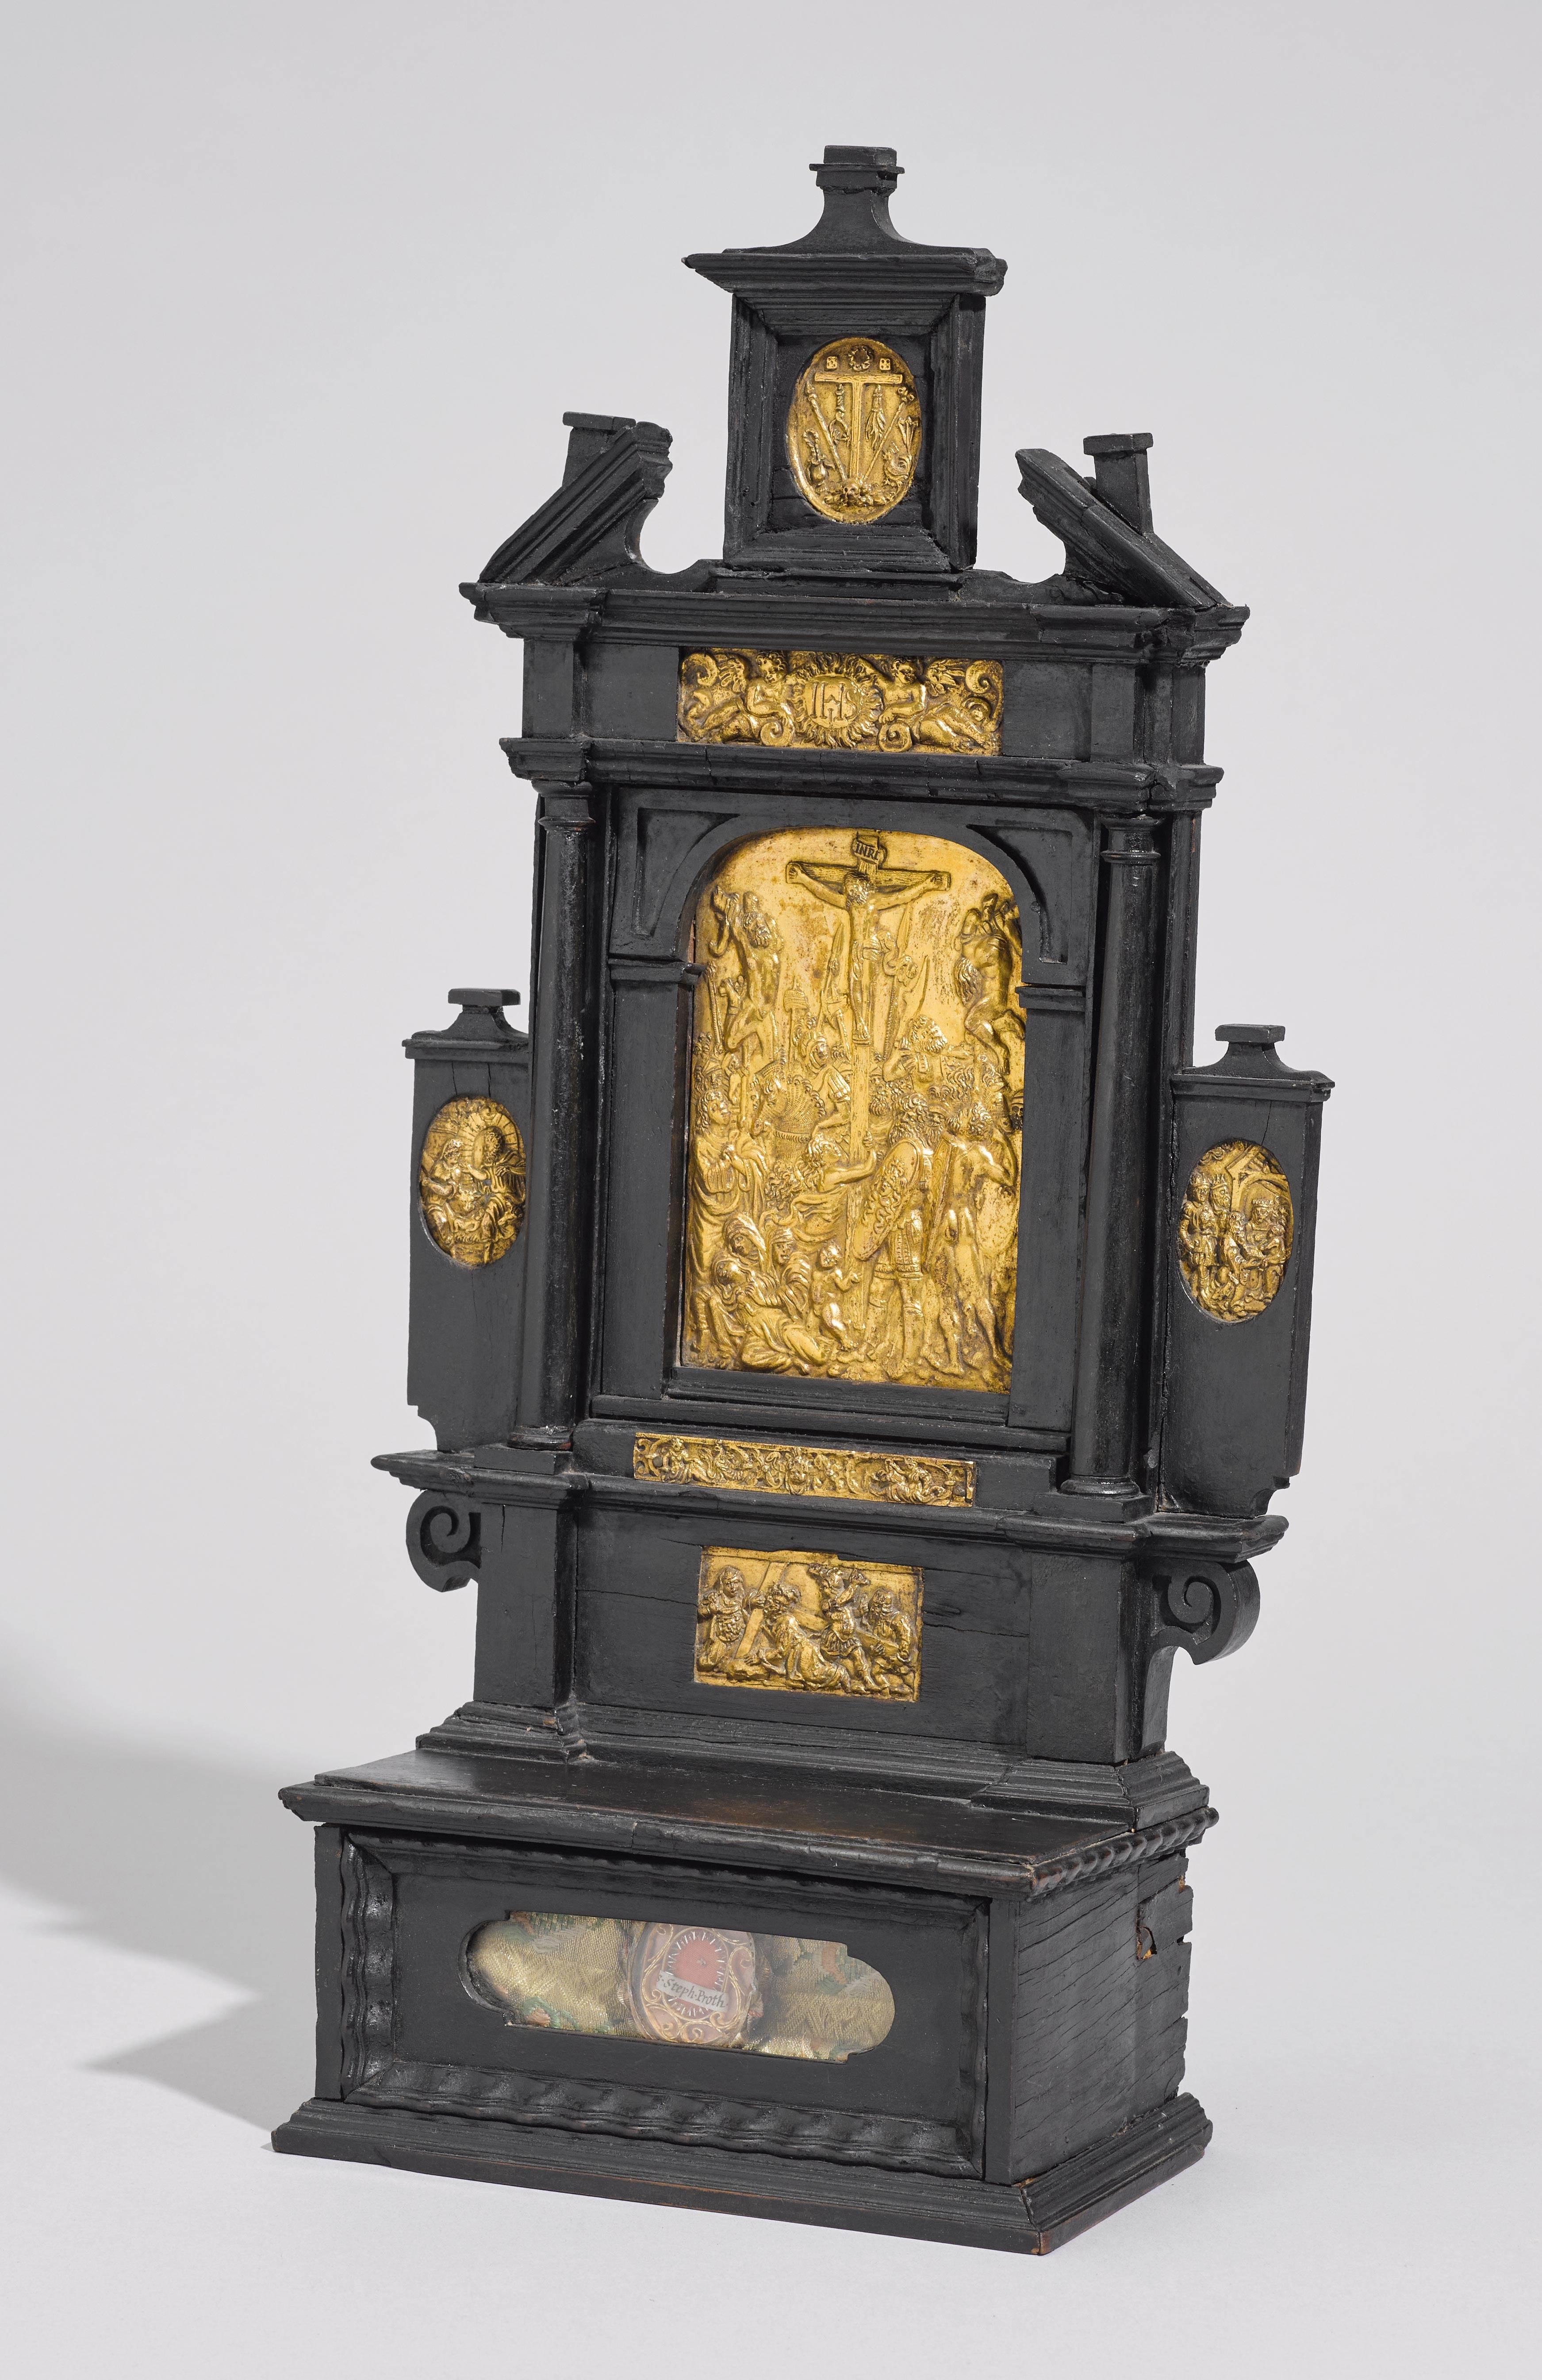 Attributed to the “Augsburger Plakettenwerkstatt.”
Augsburg, Germany, ca. 1575-1600

Approximate size: 21 x 9.5 x 40 cm.

Ebonized wooden House Altar inlaid with handsomely chased and gilt bronze plaquettes set upon a plinth containing a relic